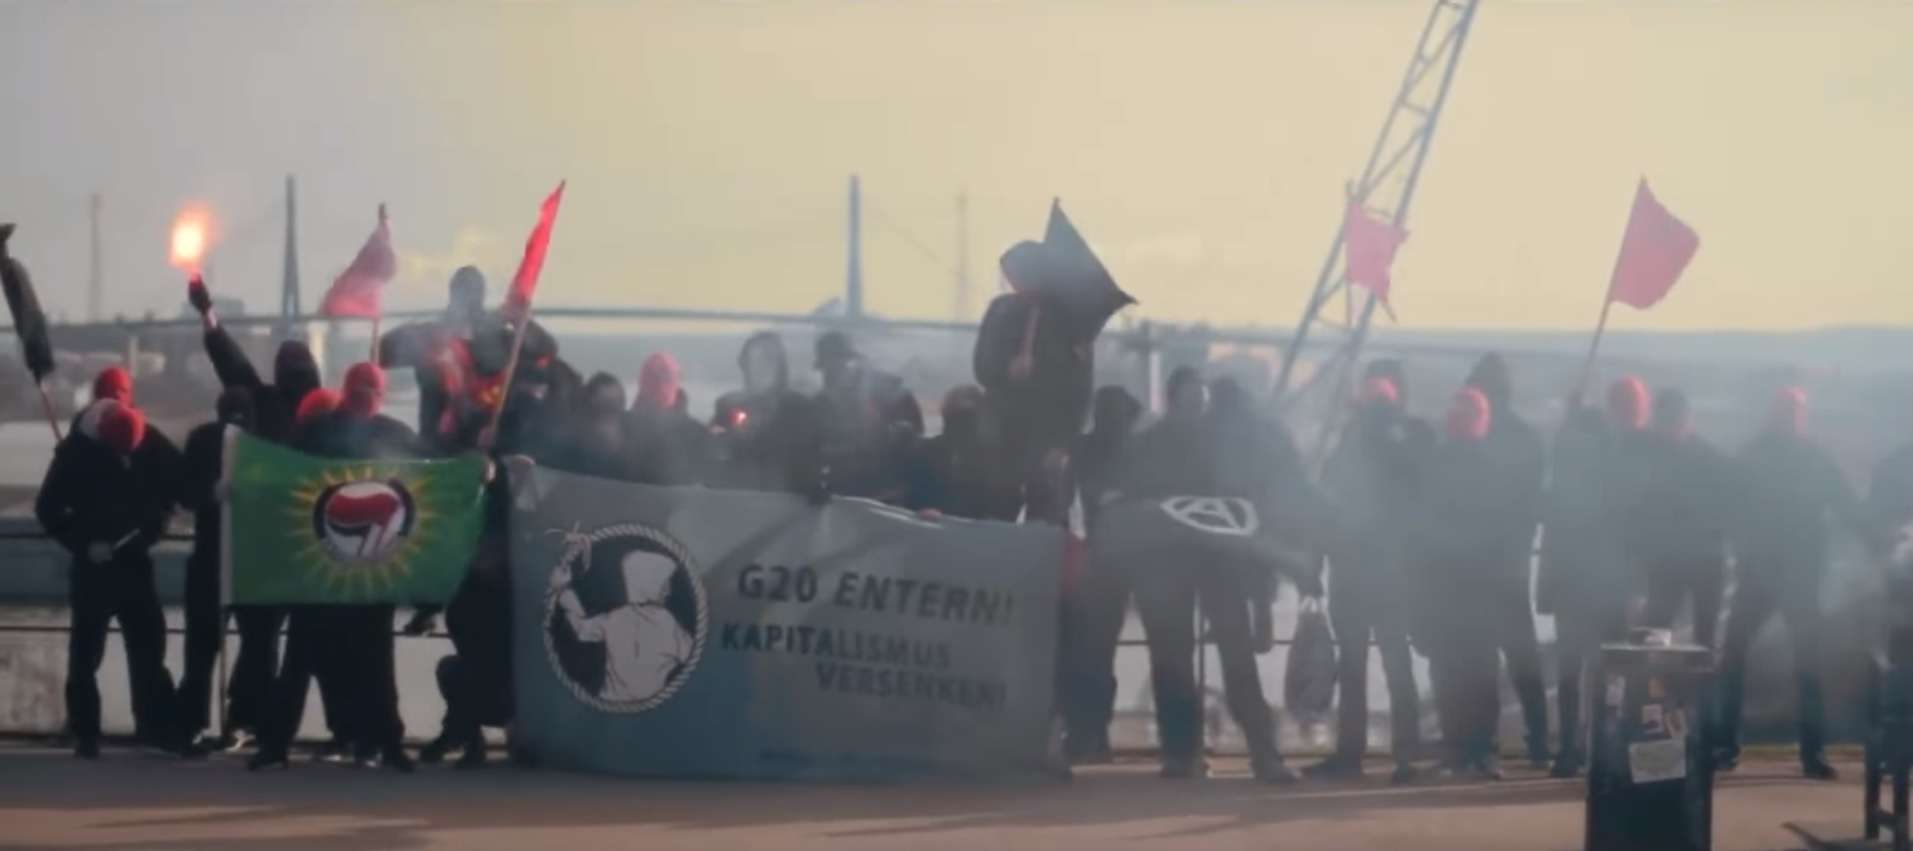 Germany: Kurdish youth, anarchists & communists mobilizing for the #G20 protests in Hamburg